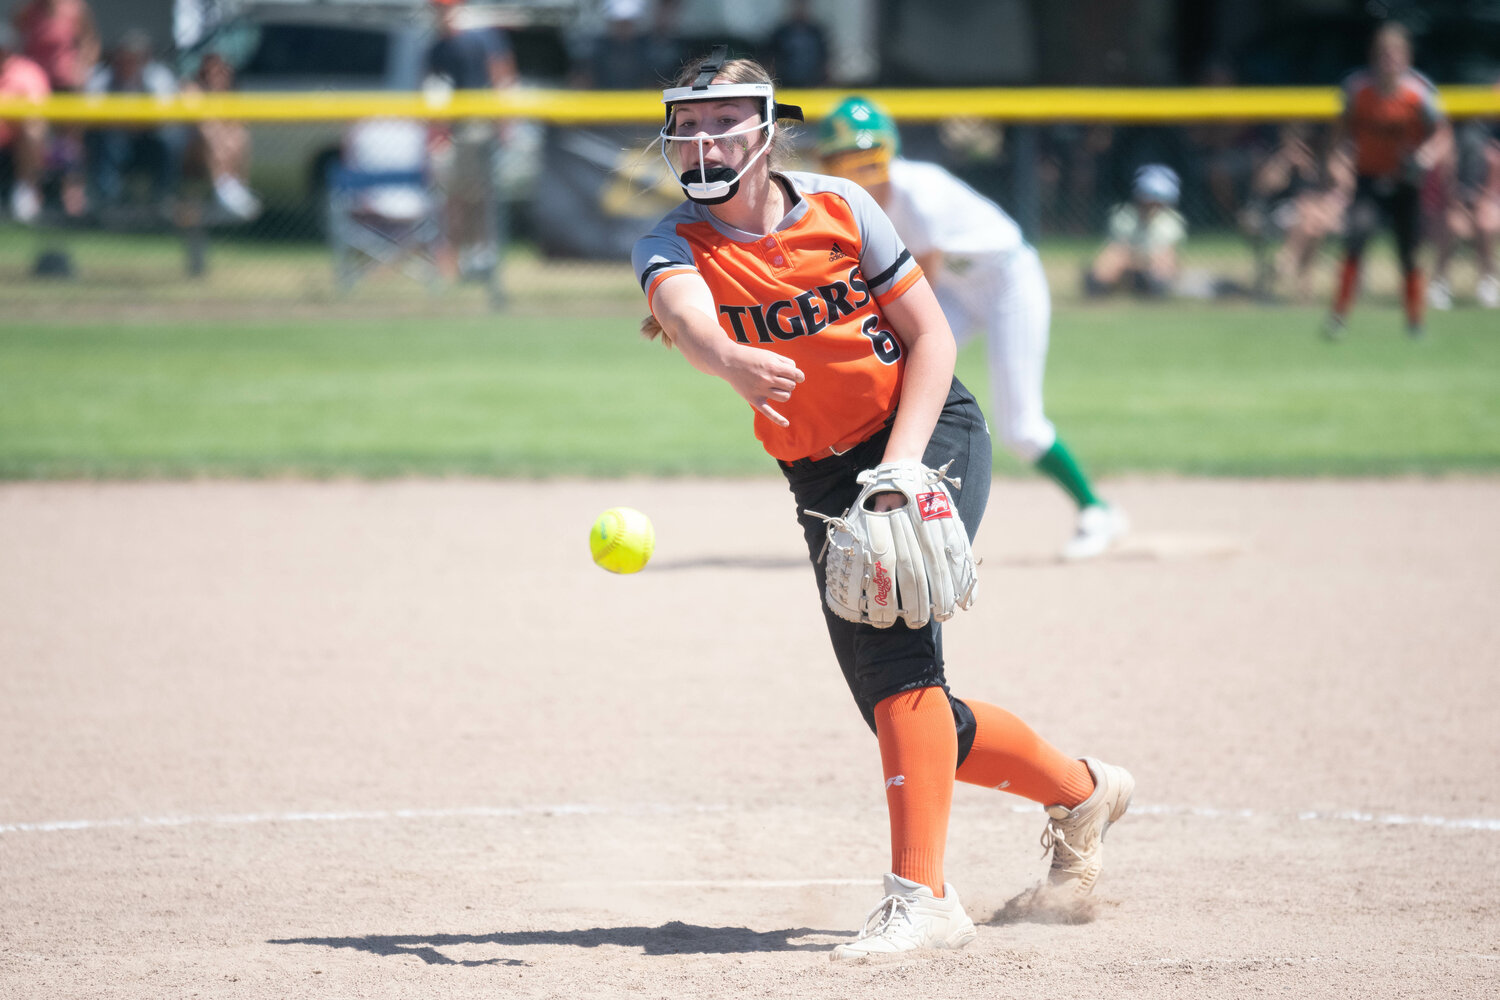 Hollynn Wakefield throws a pitch during Centralia's 5-4 loss to Lynden in the first round of the 2A state tournament, May 26 in Selah.